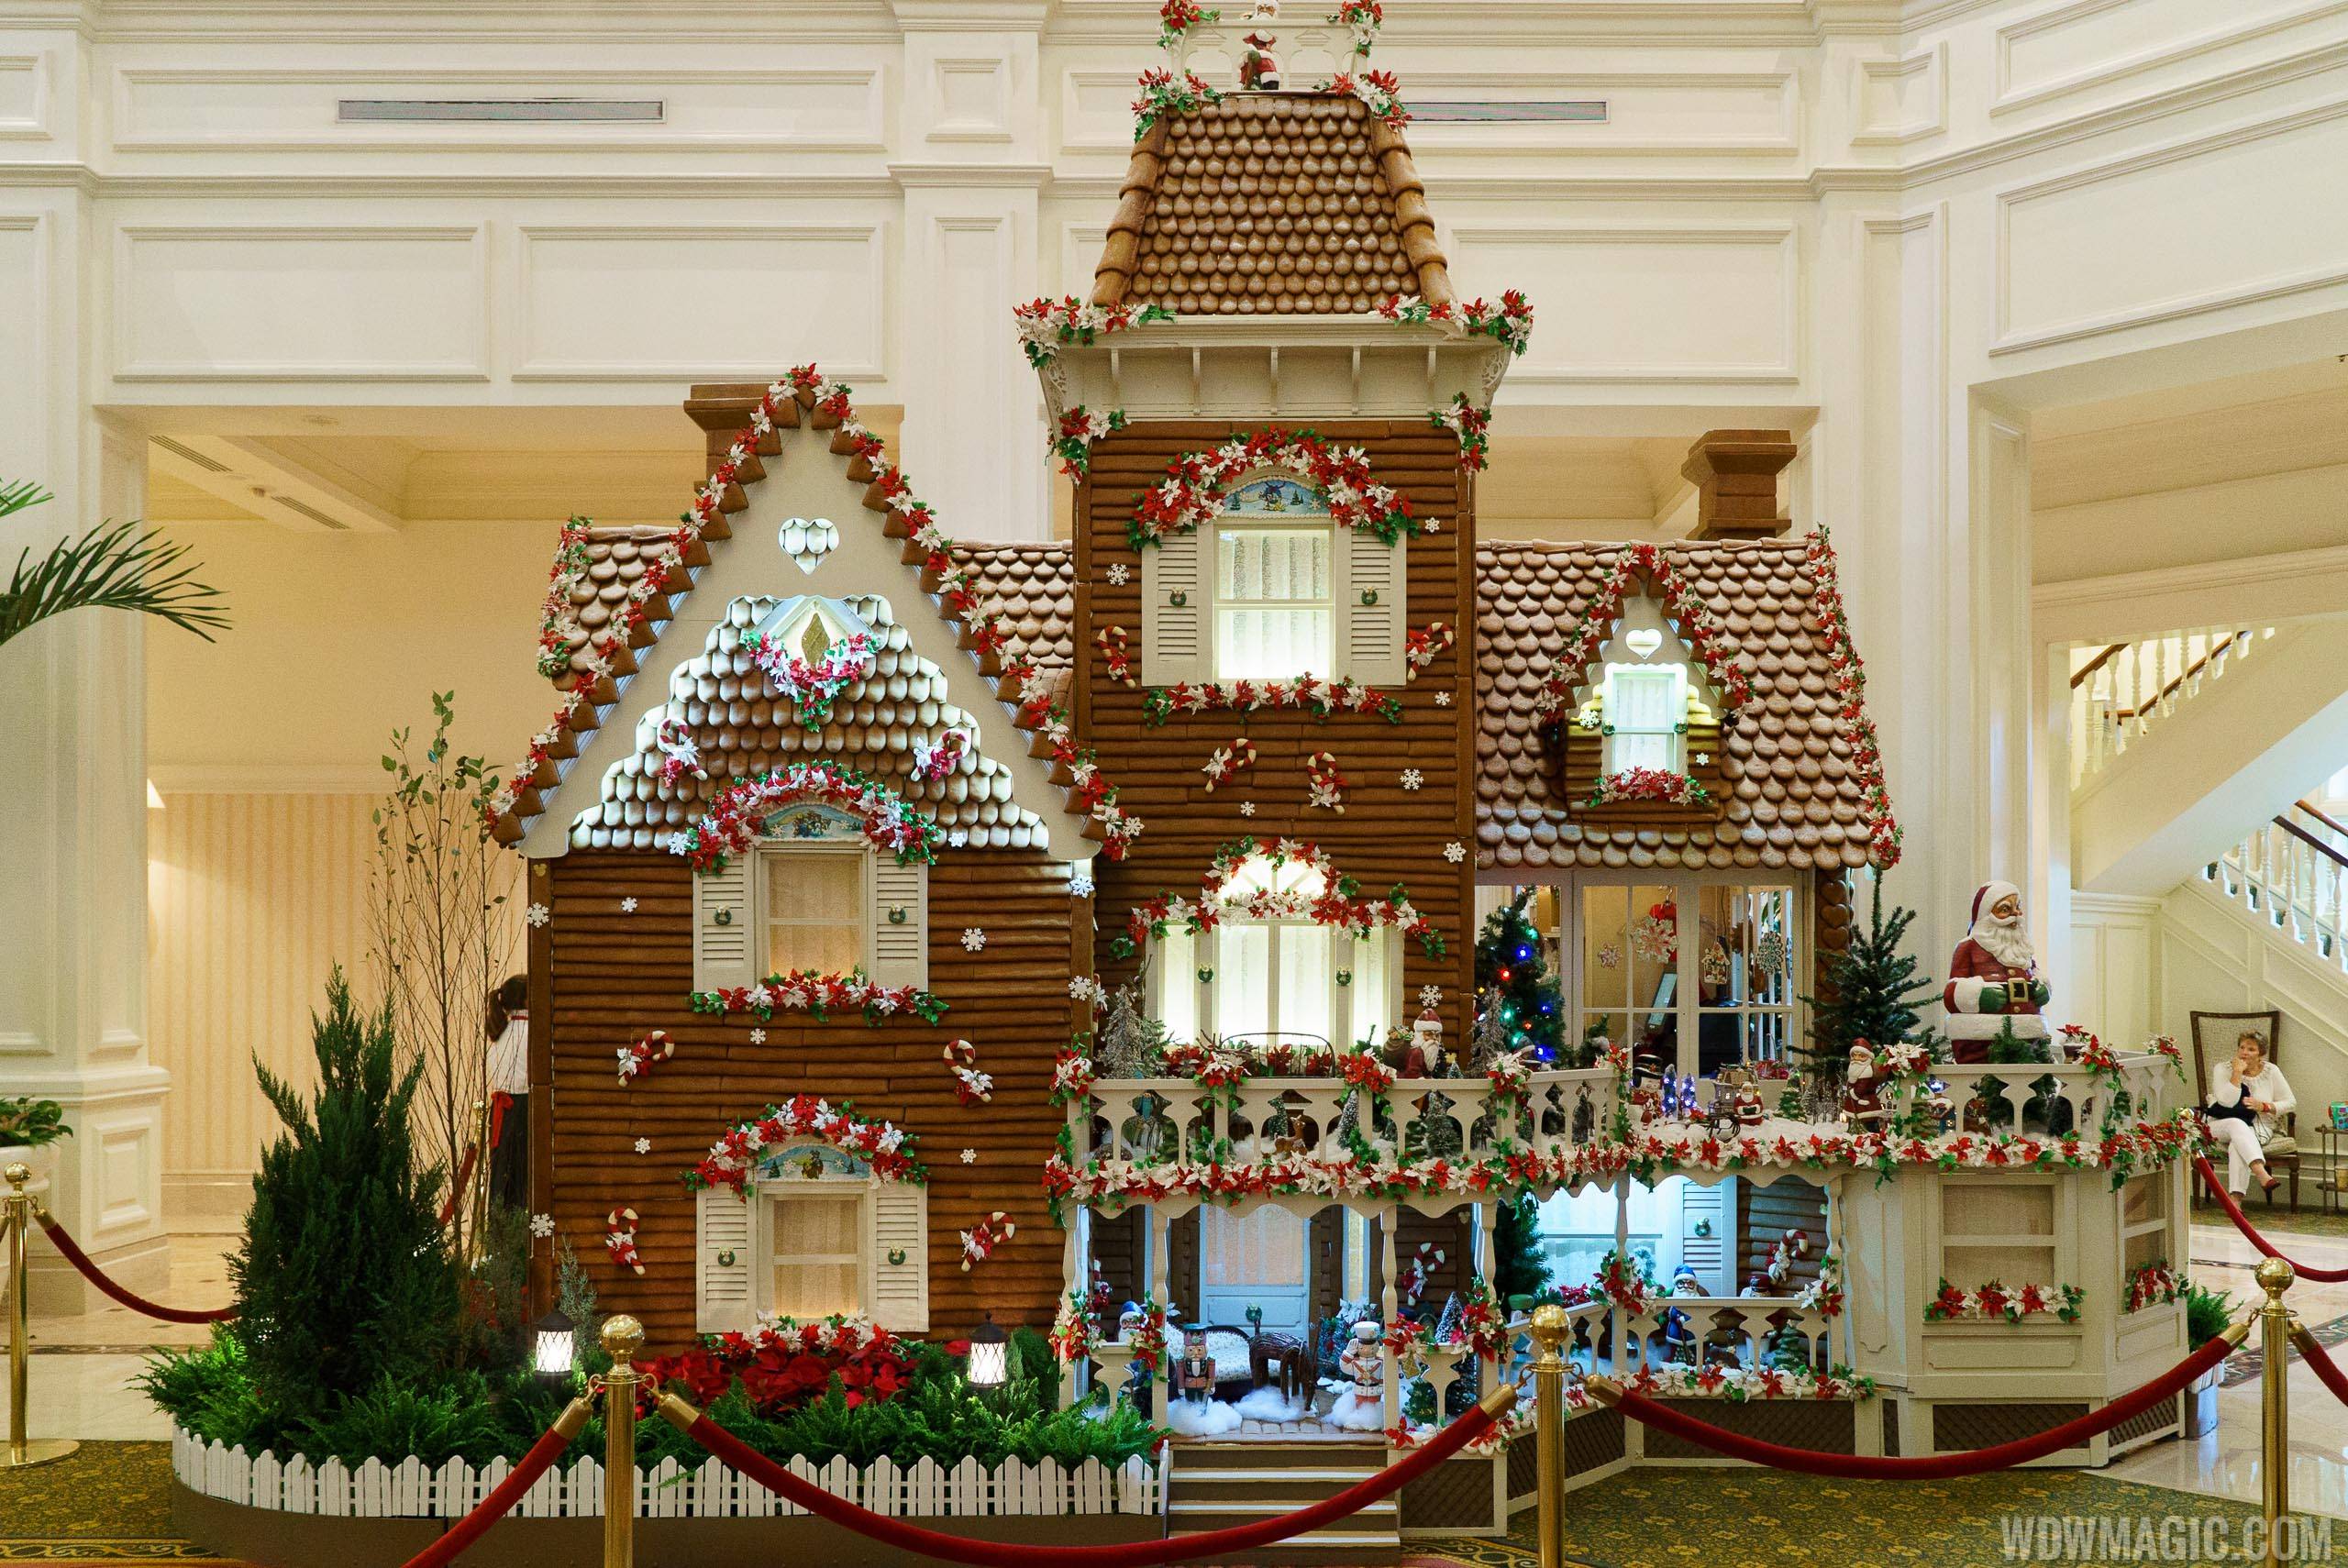 2015 Grand Floridian Gingerbread House